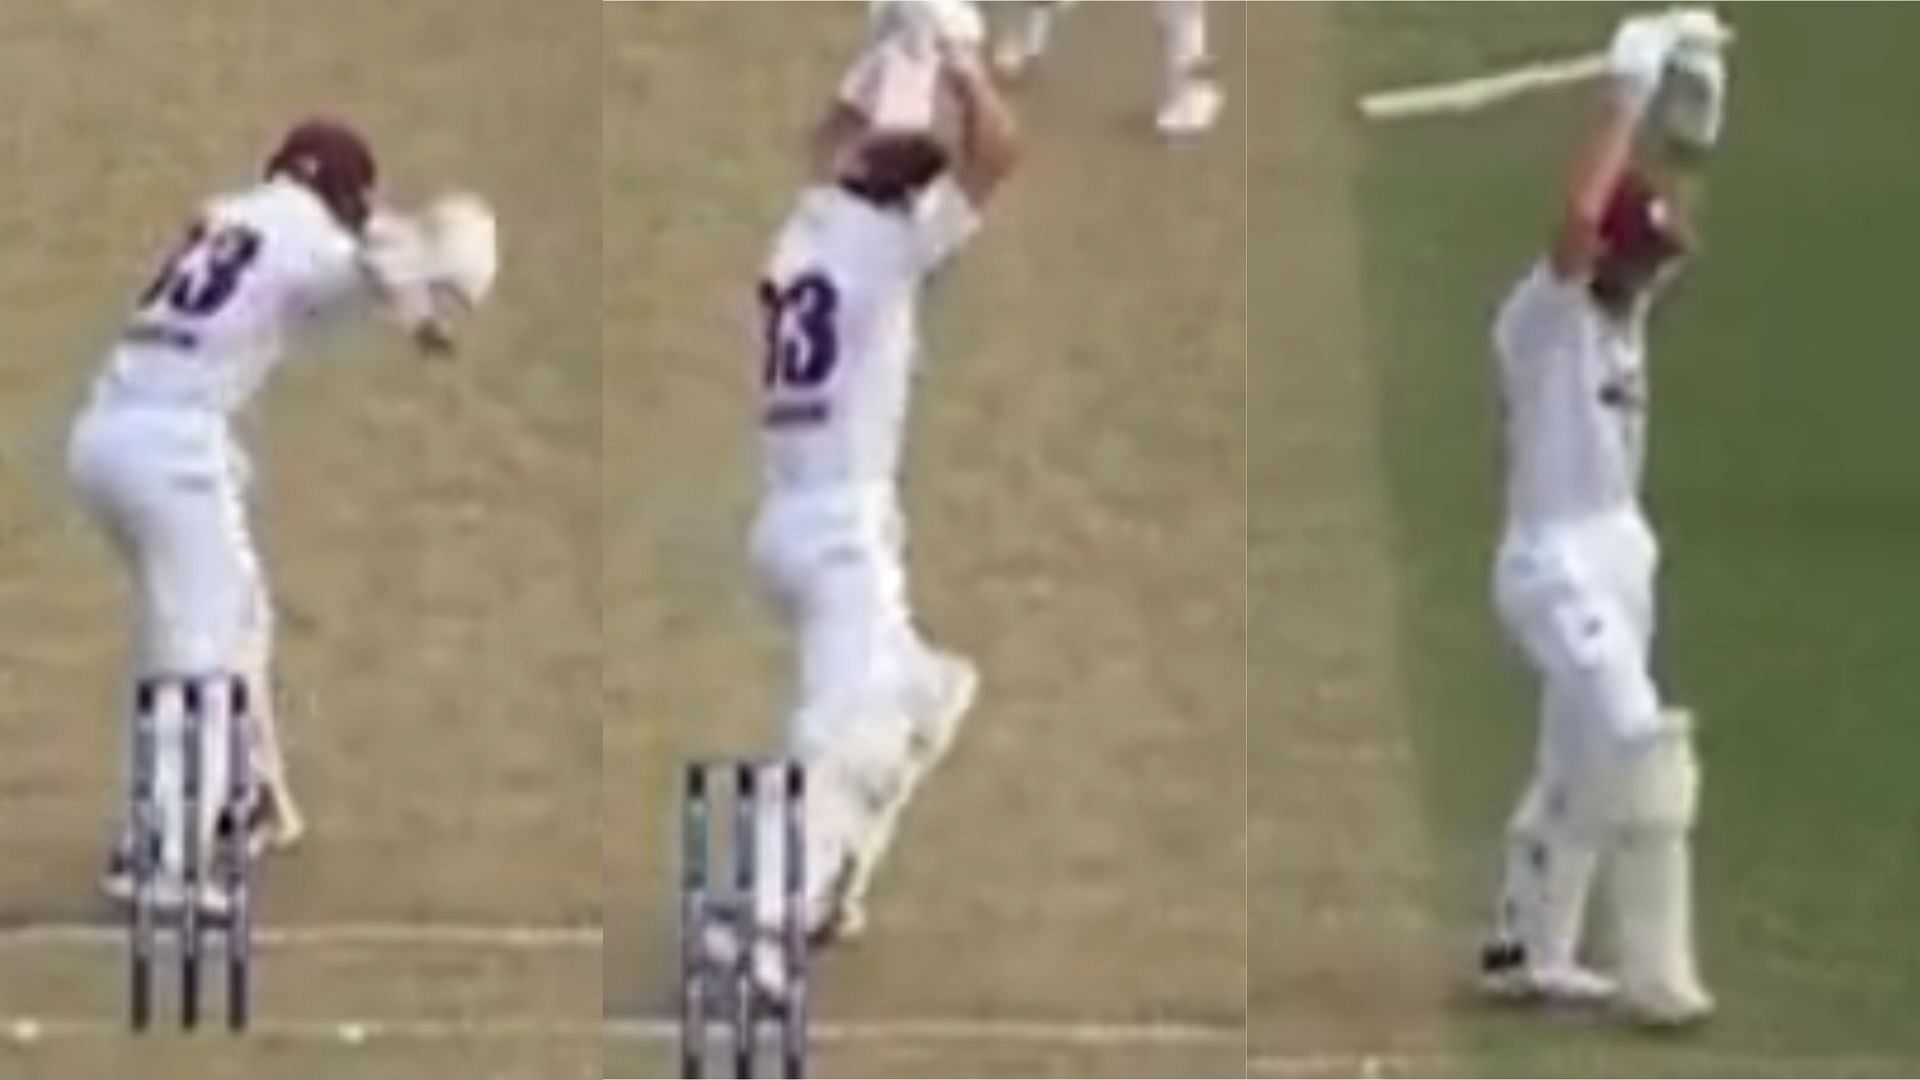 [Watch] Marcus Labuschagne walks off the field holding his leave stance after being dismissed in Sheffield Shield encounter 